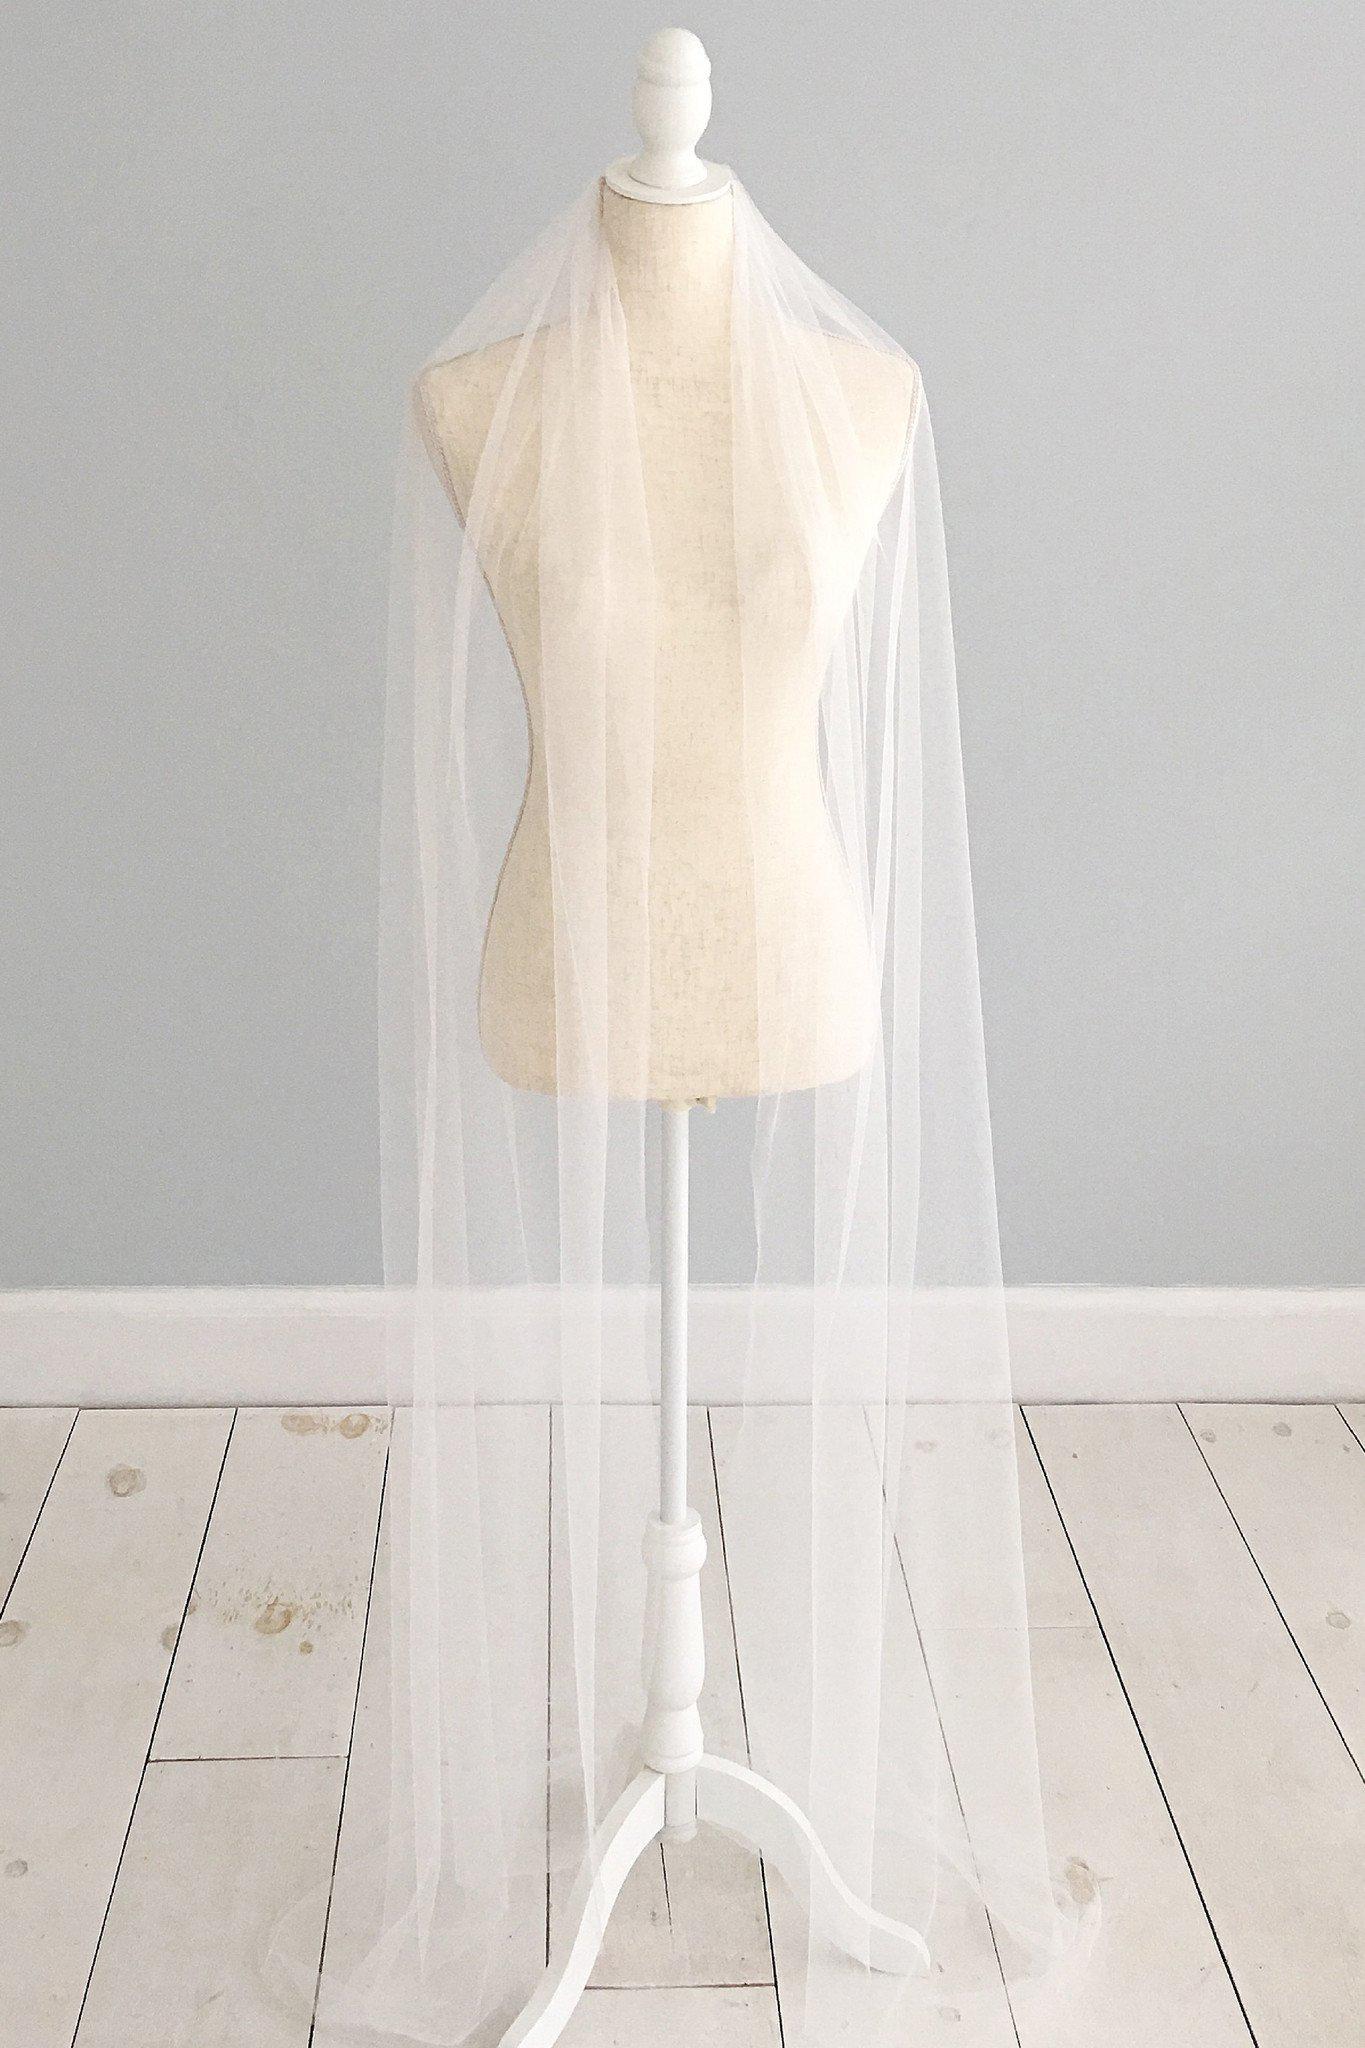 An extraordinary review of our 'Isabella' silk style veil